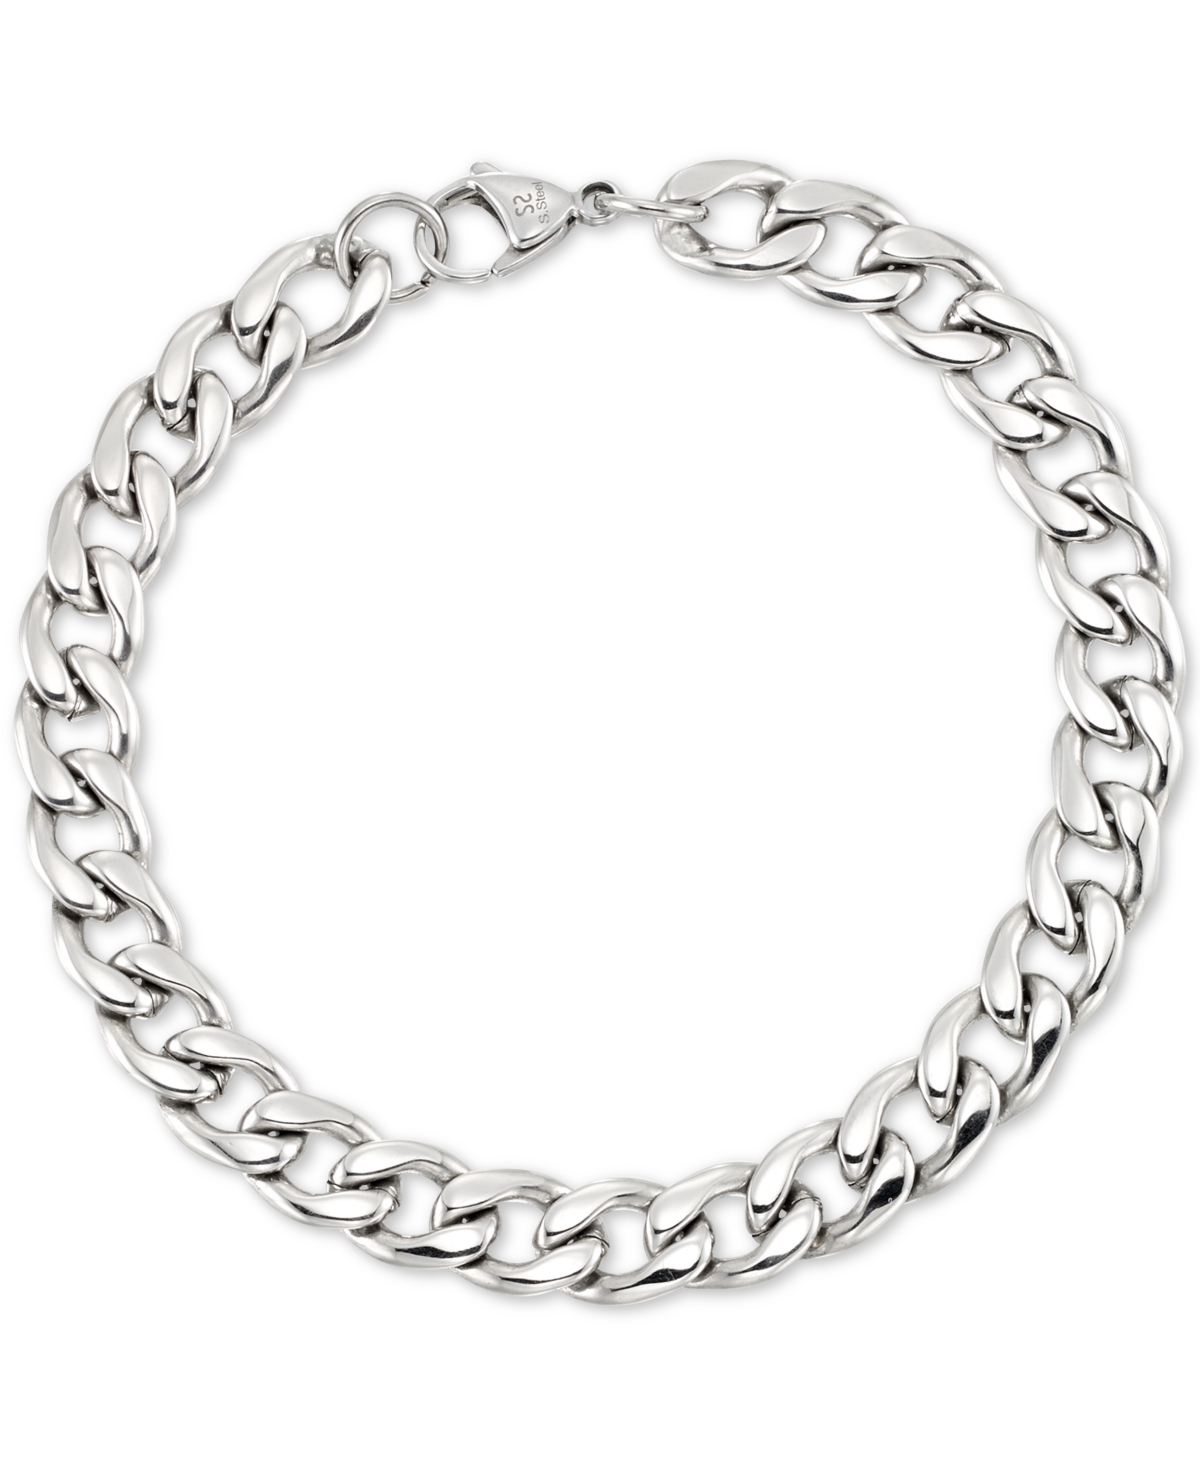 Legacy for Men by Simone I. Smith Curb Chain Bracelet in Stainless Steel